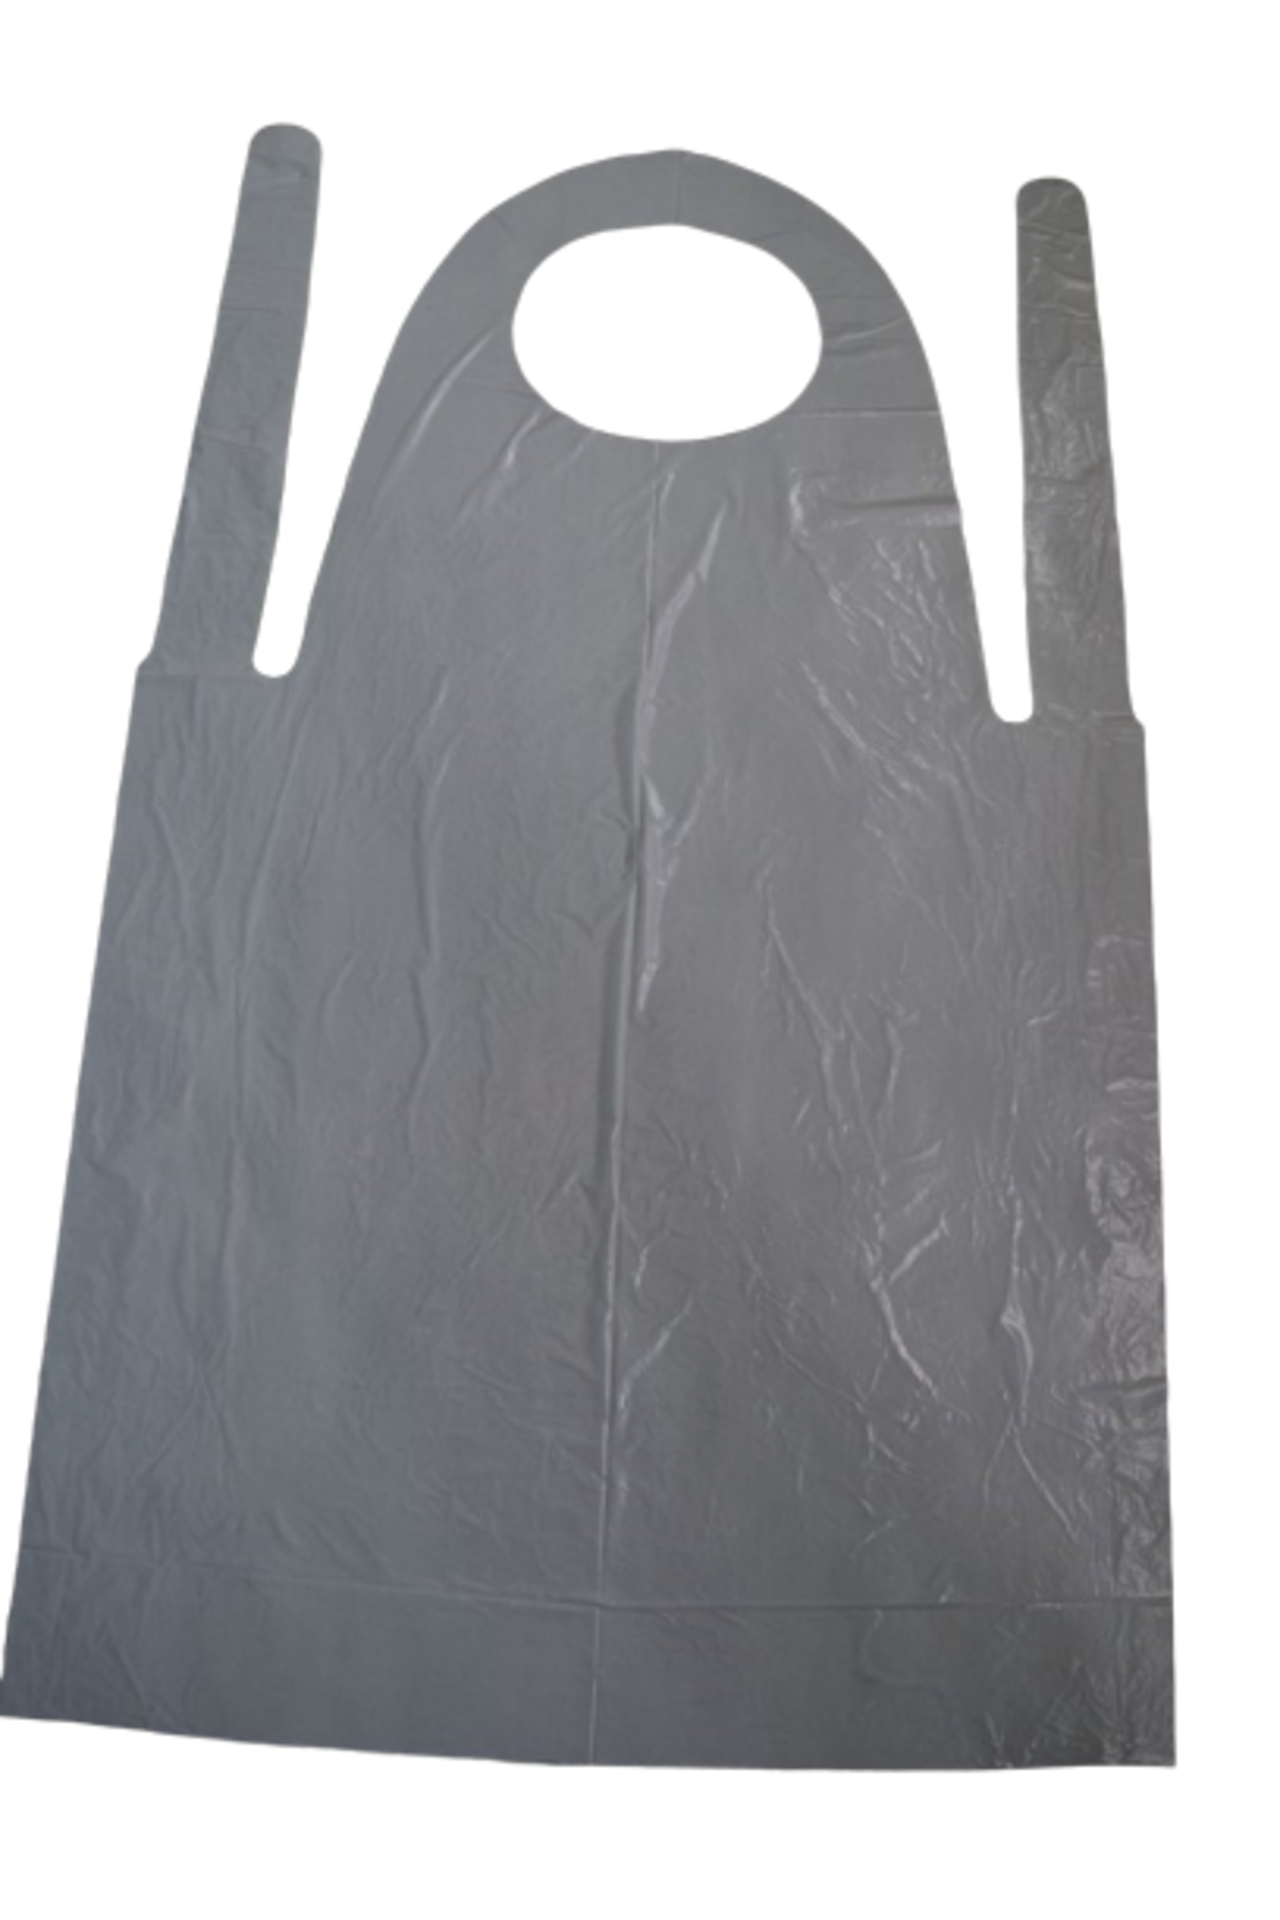 Single Use Knee Length Apron (6000pcs) 1 pallet of 10 cartons (6000pcs) Delivery included - Image 2 of 3